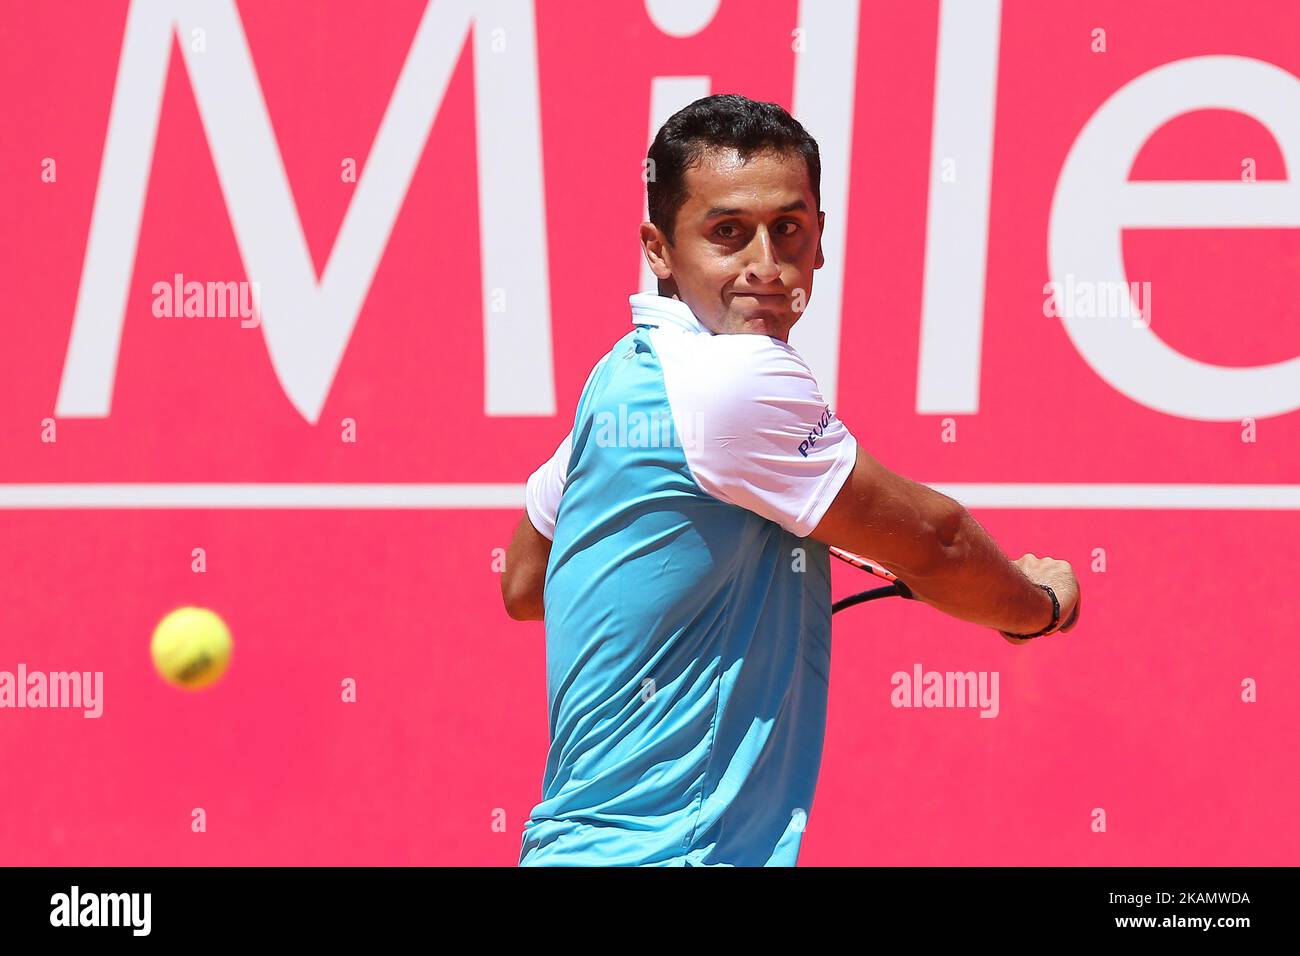 NICOLAS ALMAGRO from SPAIN in action during the match Nicolas Almagro  between Benoit Paire for Millennium Estoril Open at Clube de Tenis do  Estoril on May 2, 2017 in Estoril, Portugal.(Photo by